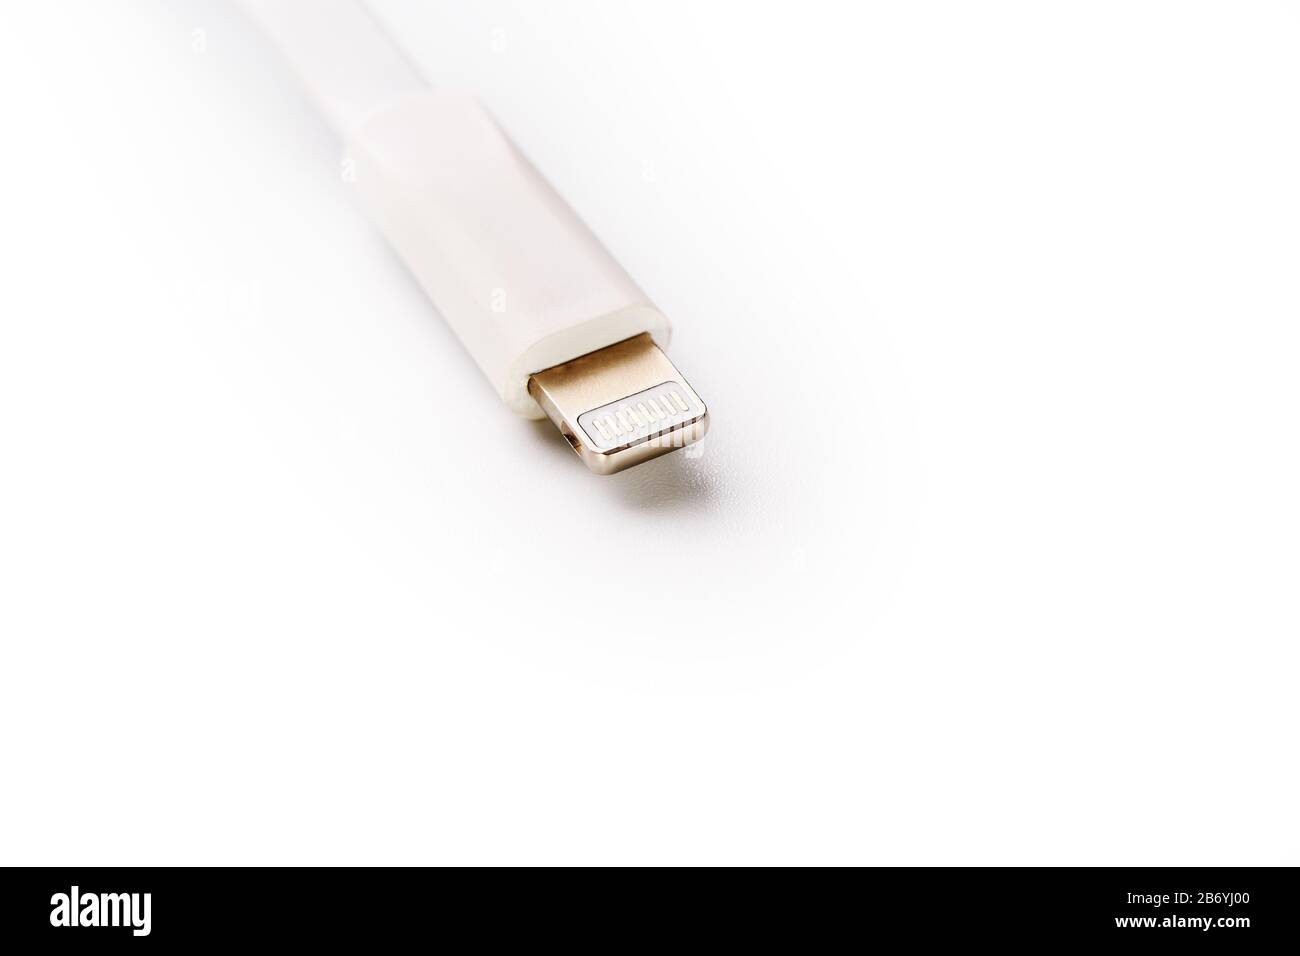 Connector lightning on a white background. This is a proprietary connector used to connect mobile devices to well-known host computers. Stock Photo